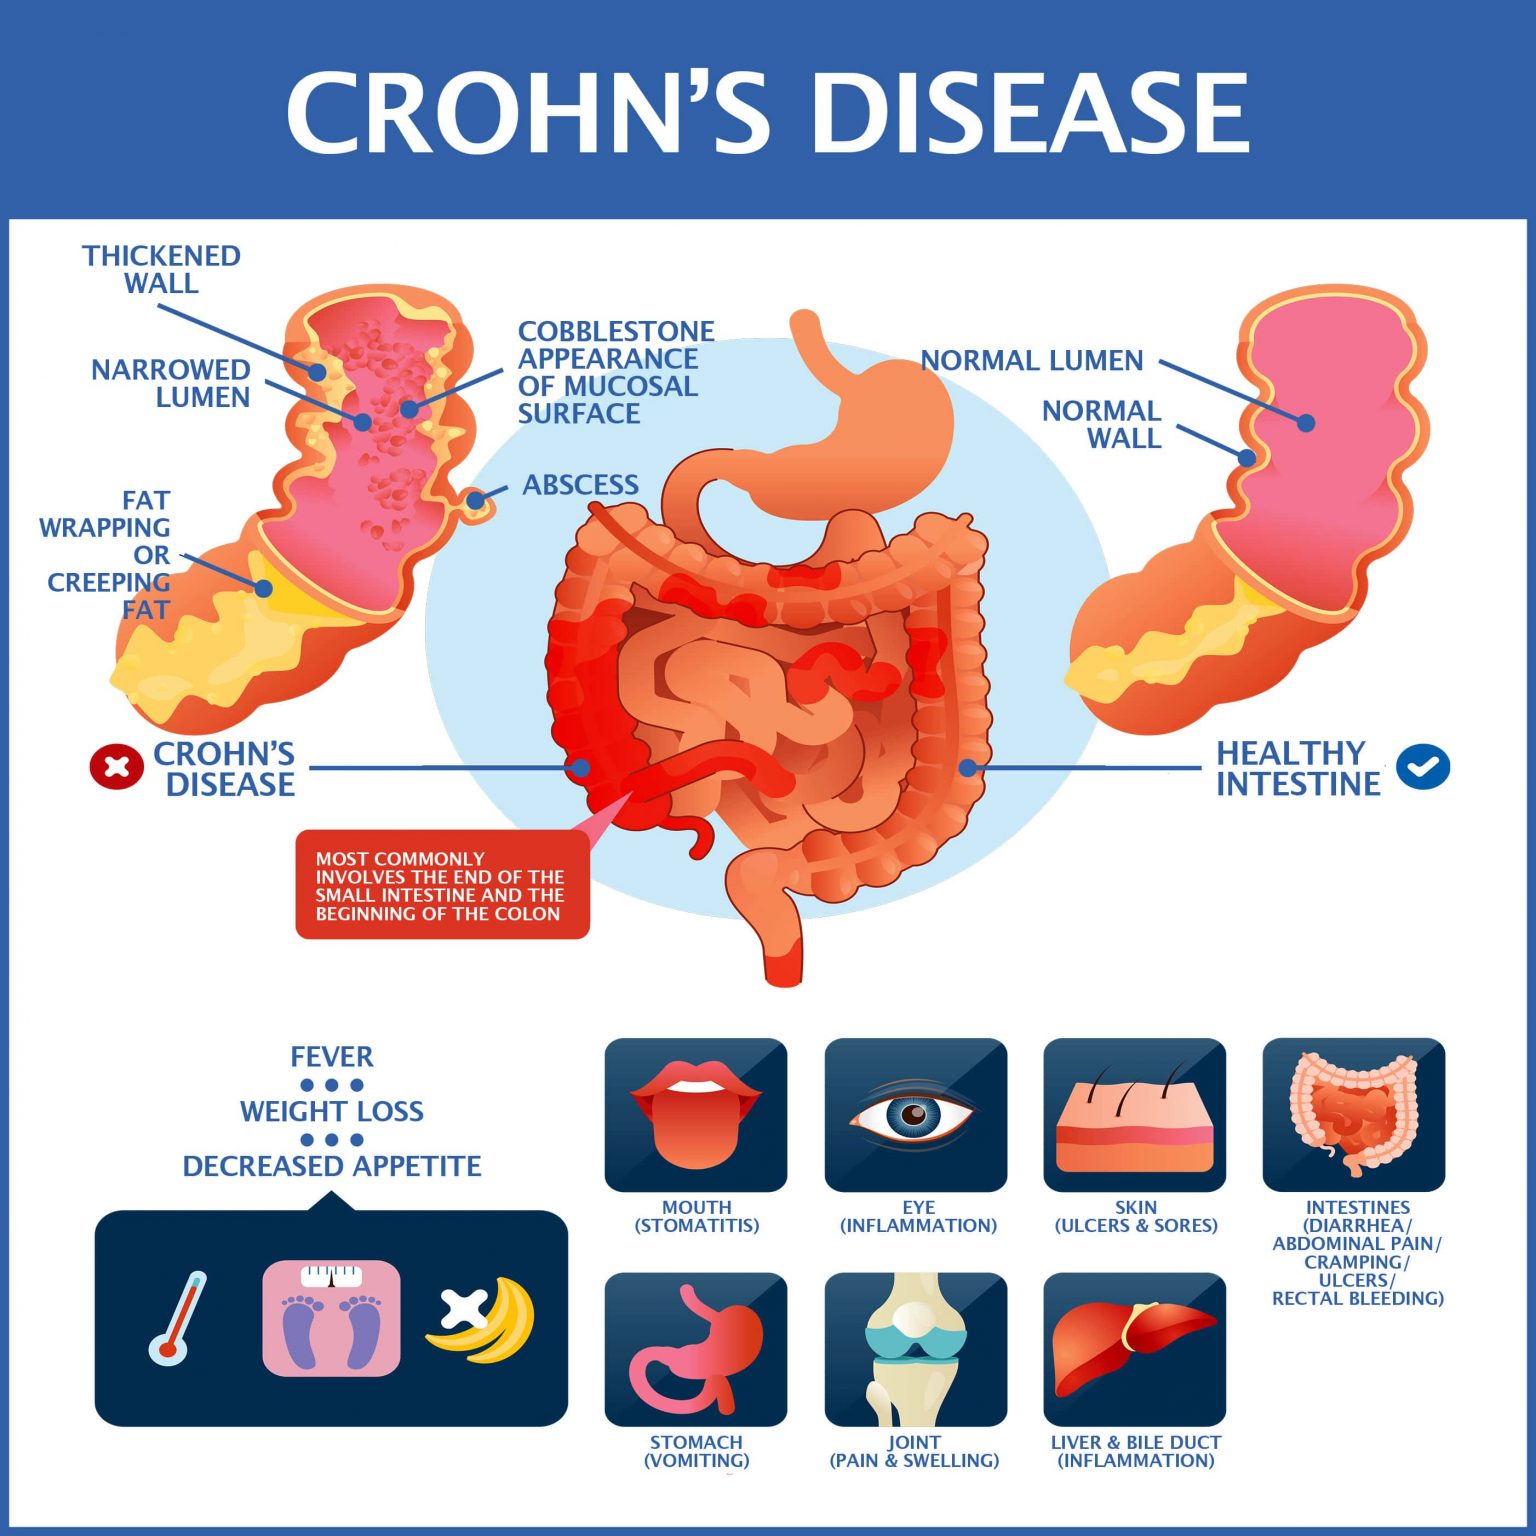 Been Diagnosed With Crohnâs Disease?